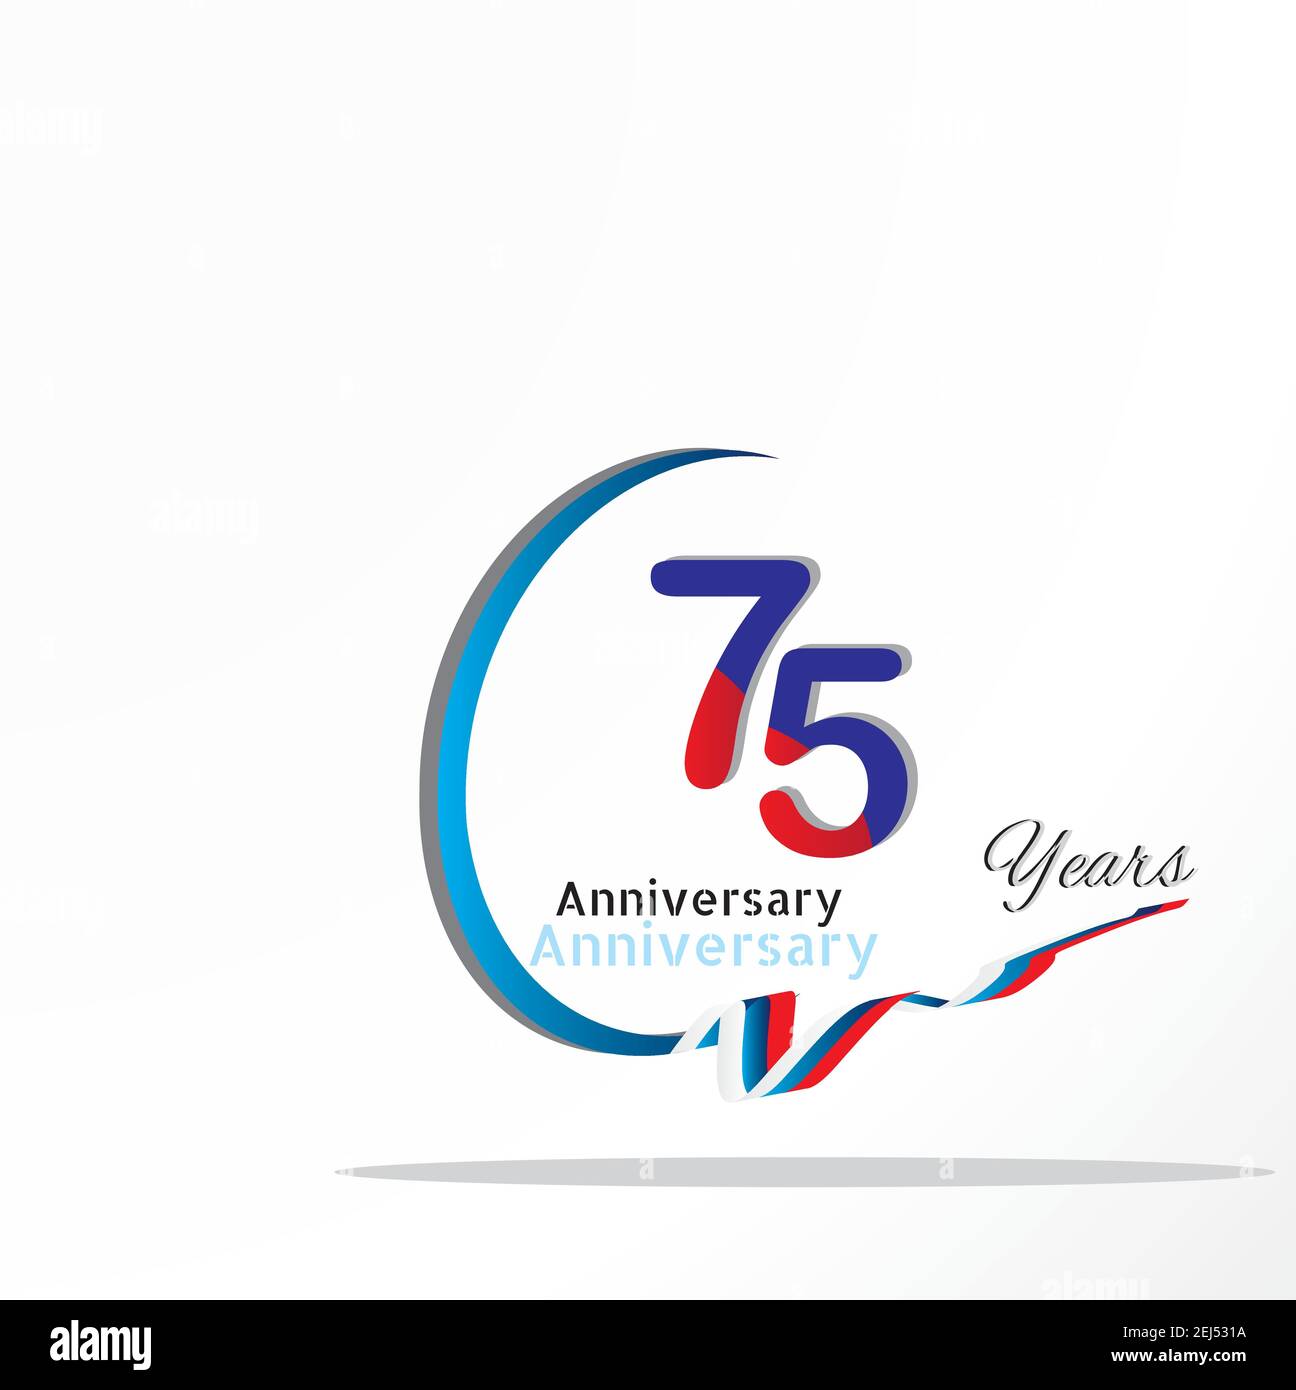 75 anniversary celebration logotype green and red colored. seventy eight years birthday logo on white background. Stock Vector